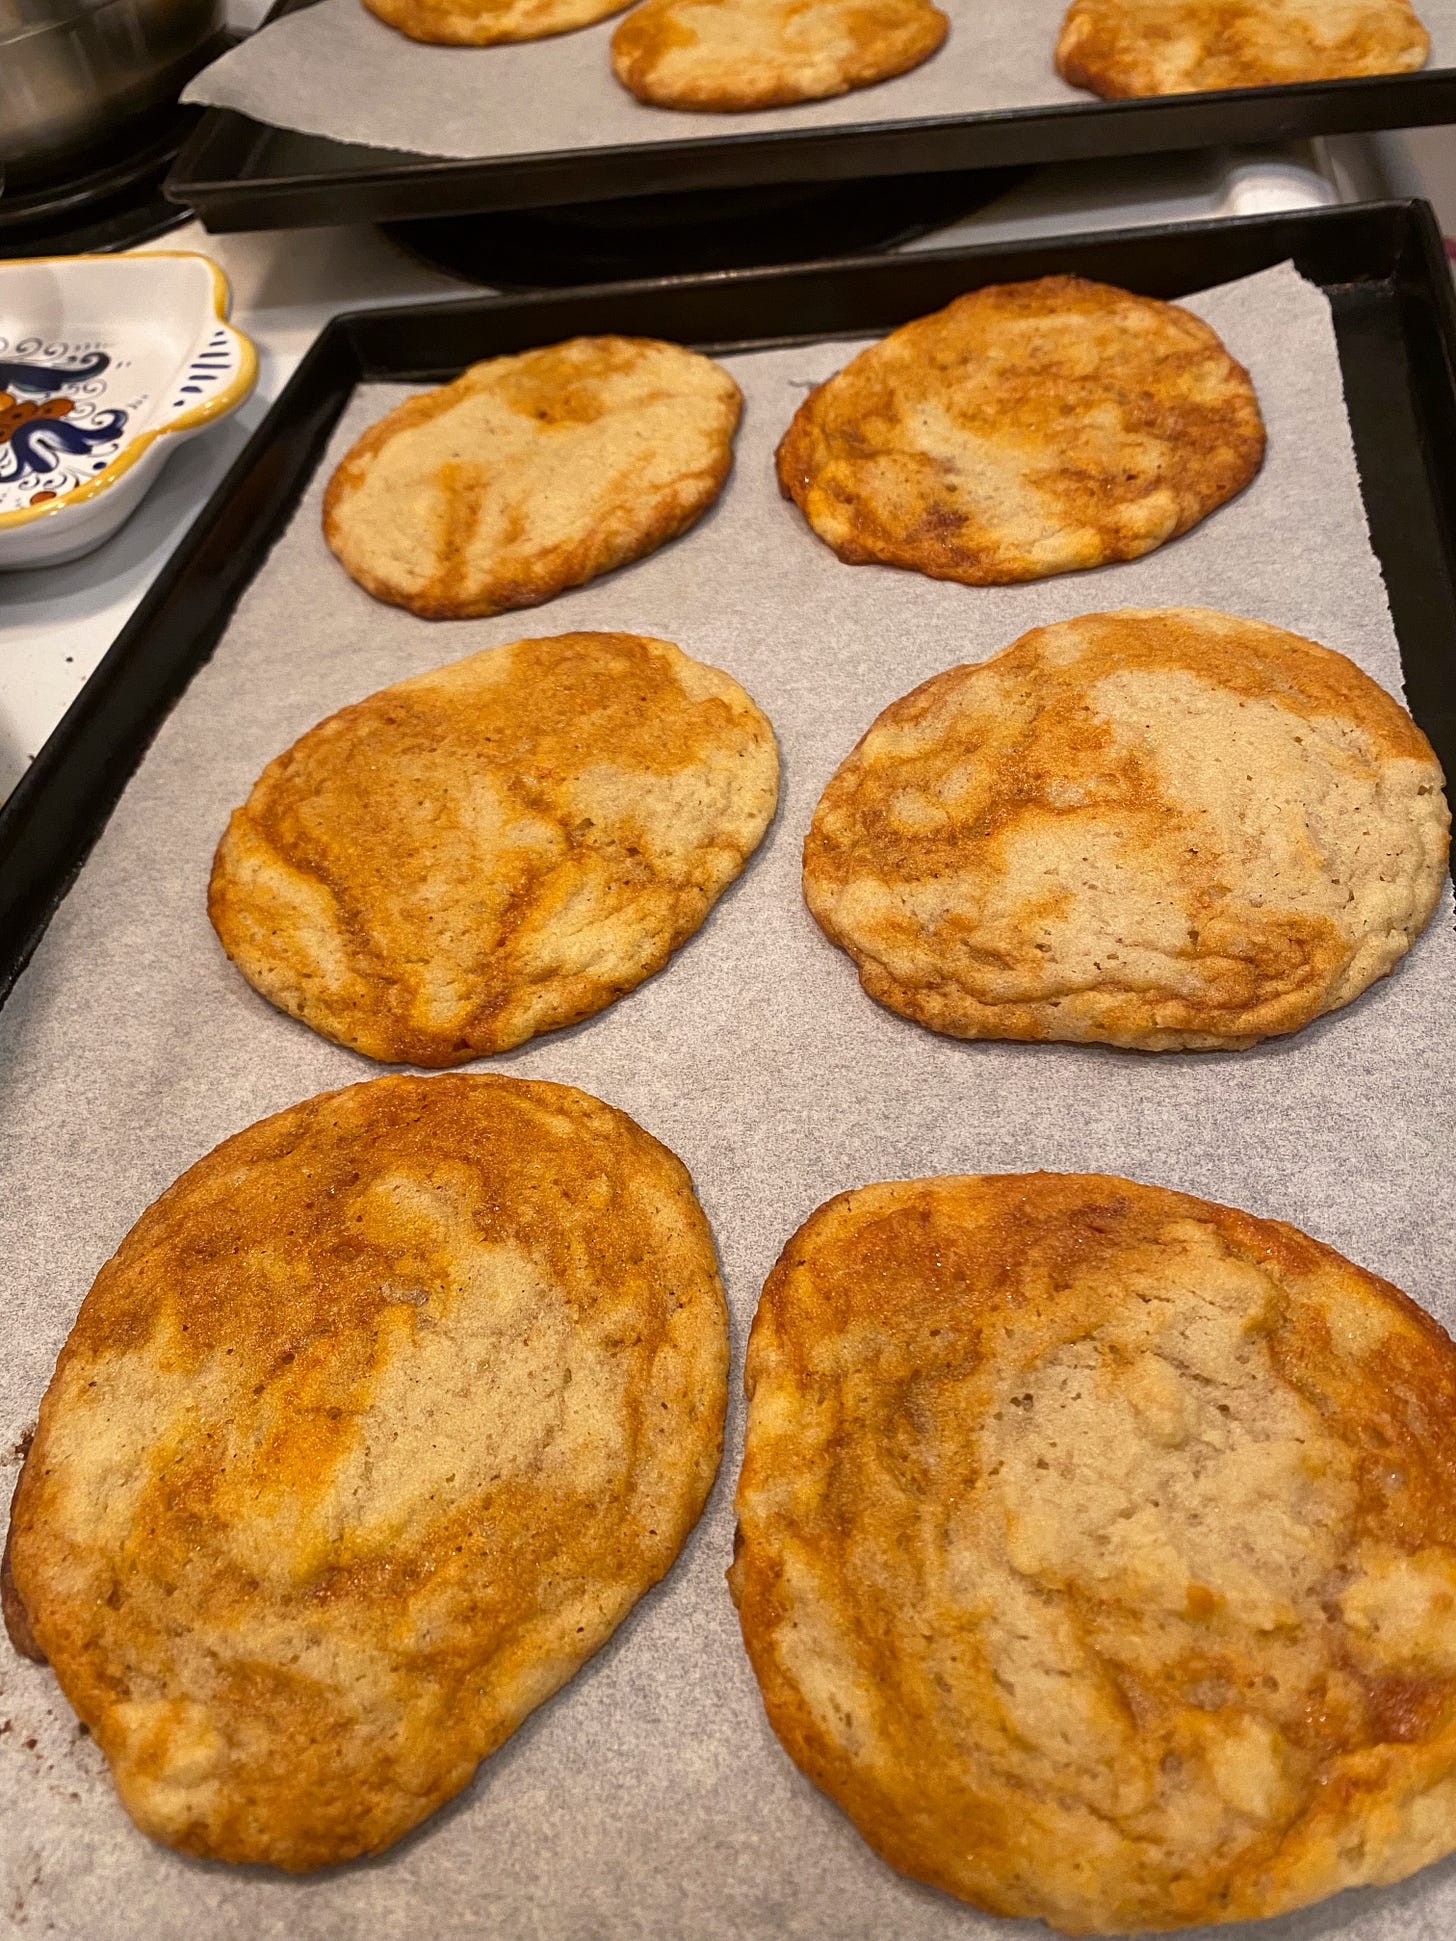 On a black baking pan lined with parchment, six large sugar cookies with orange-y stripes of gochujang caramel. Another pan of the same is just visible in the backgrond at the edge of the frame.